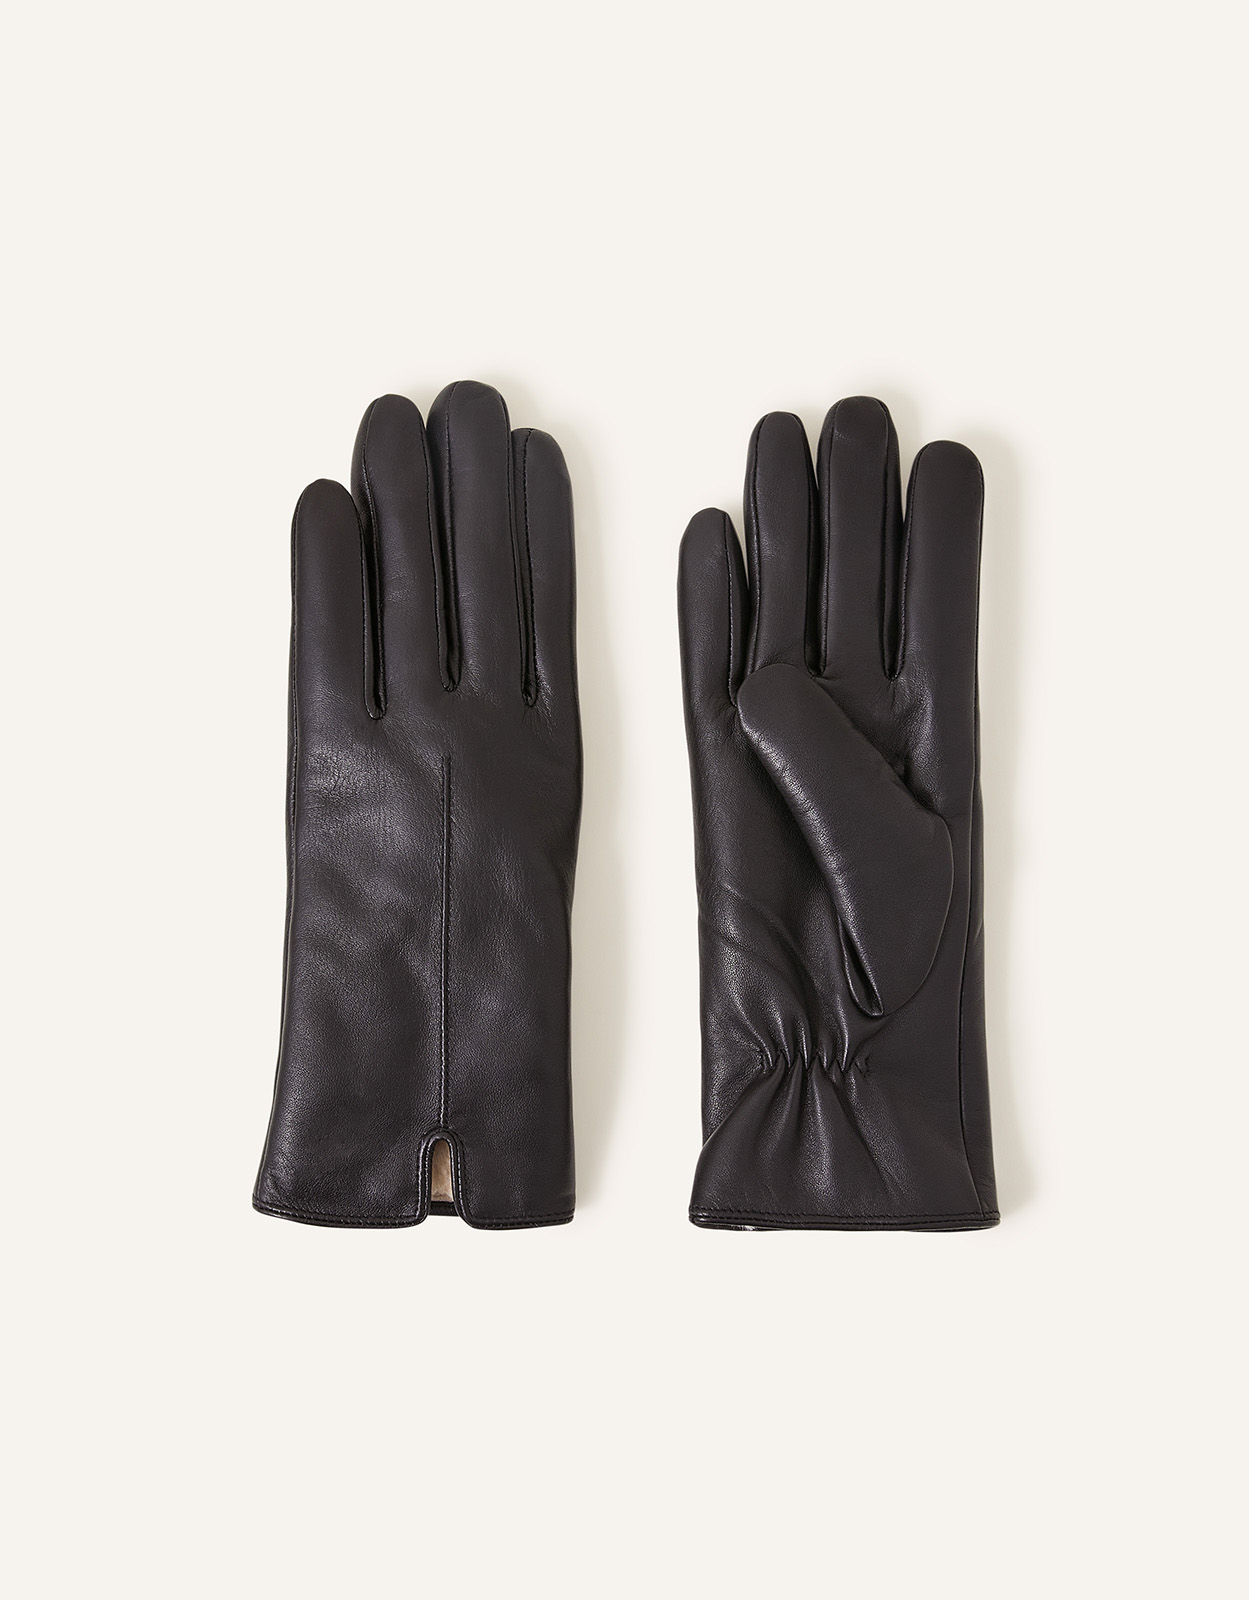 Accessorize Faux Fur-Lined Leather Gloves Black, Size: One Size